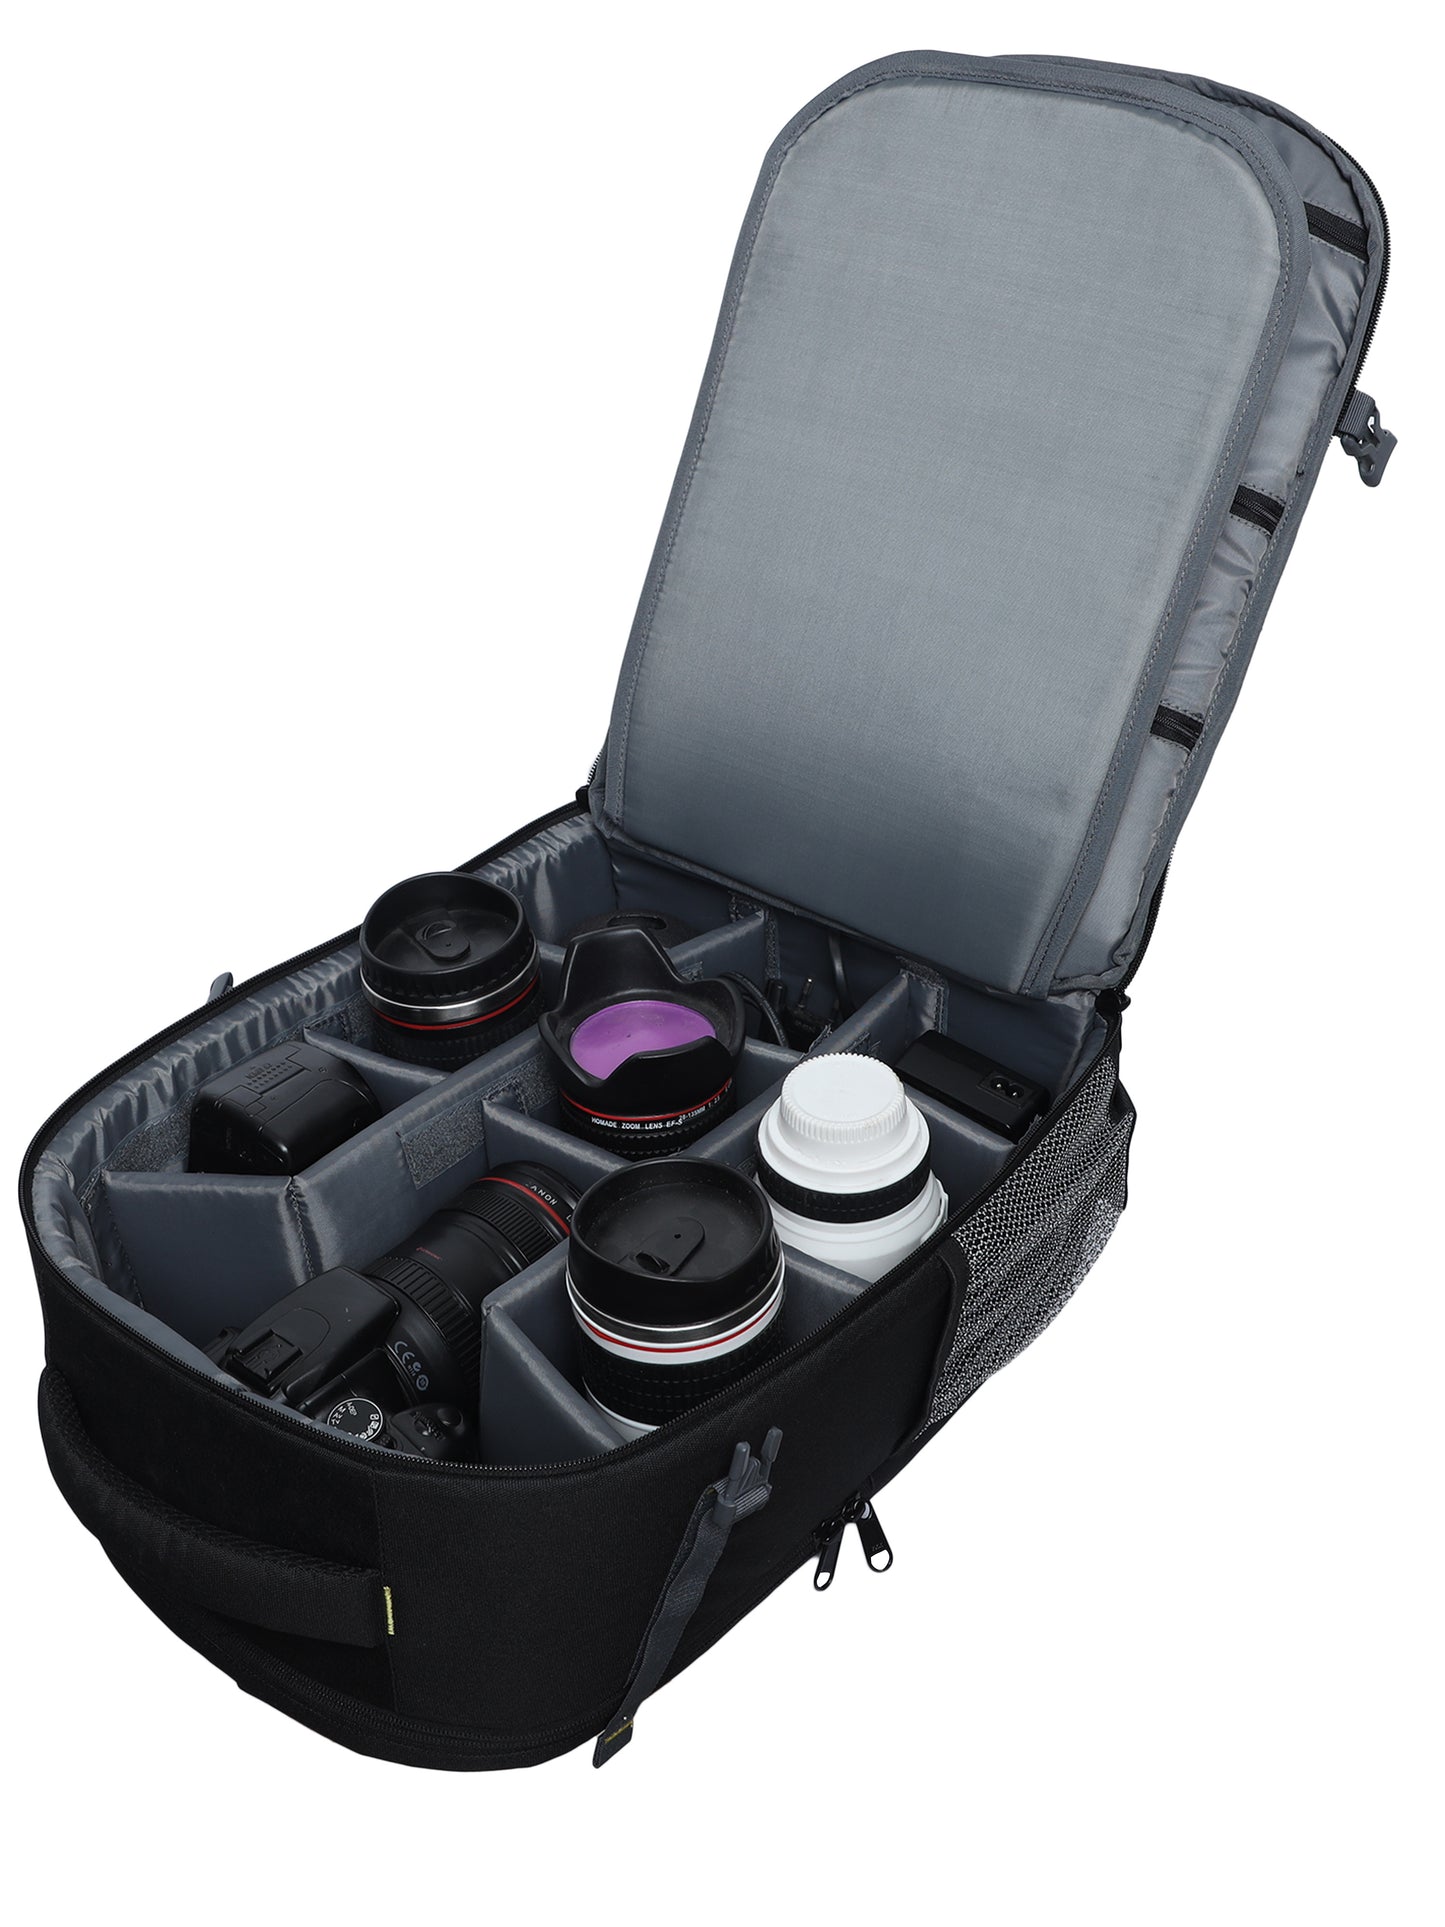 Image: Open view of the G14 Screenshot DSLR camera bag, revealing a carefully arranged assortment of cameras, lenses, tripods, flashes, and other essential photography equipment. The bag's spacious compartments and customizable organization ensure convenient storage and easy access to gear during photo shoots.